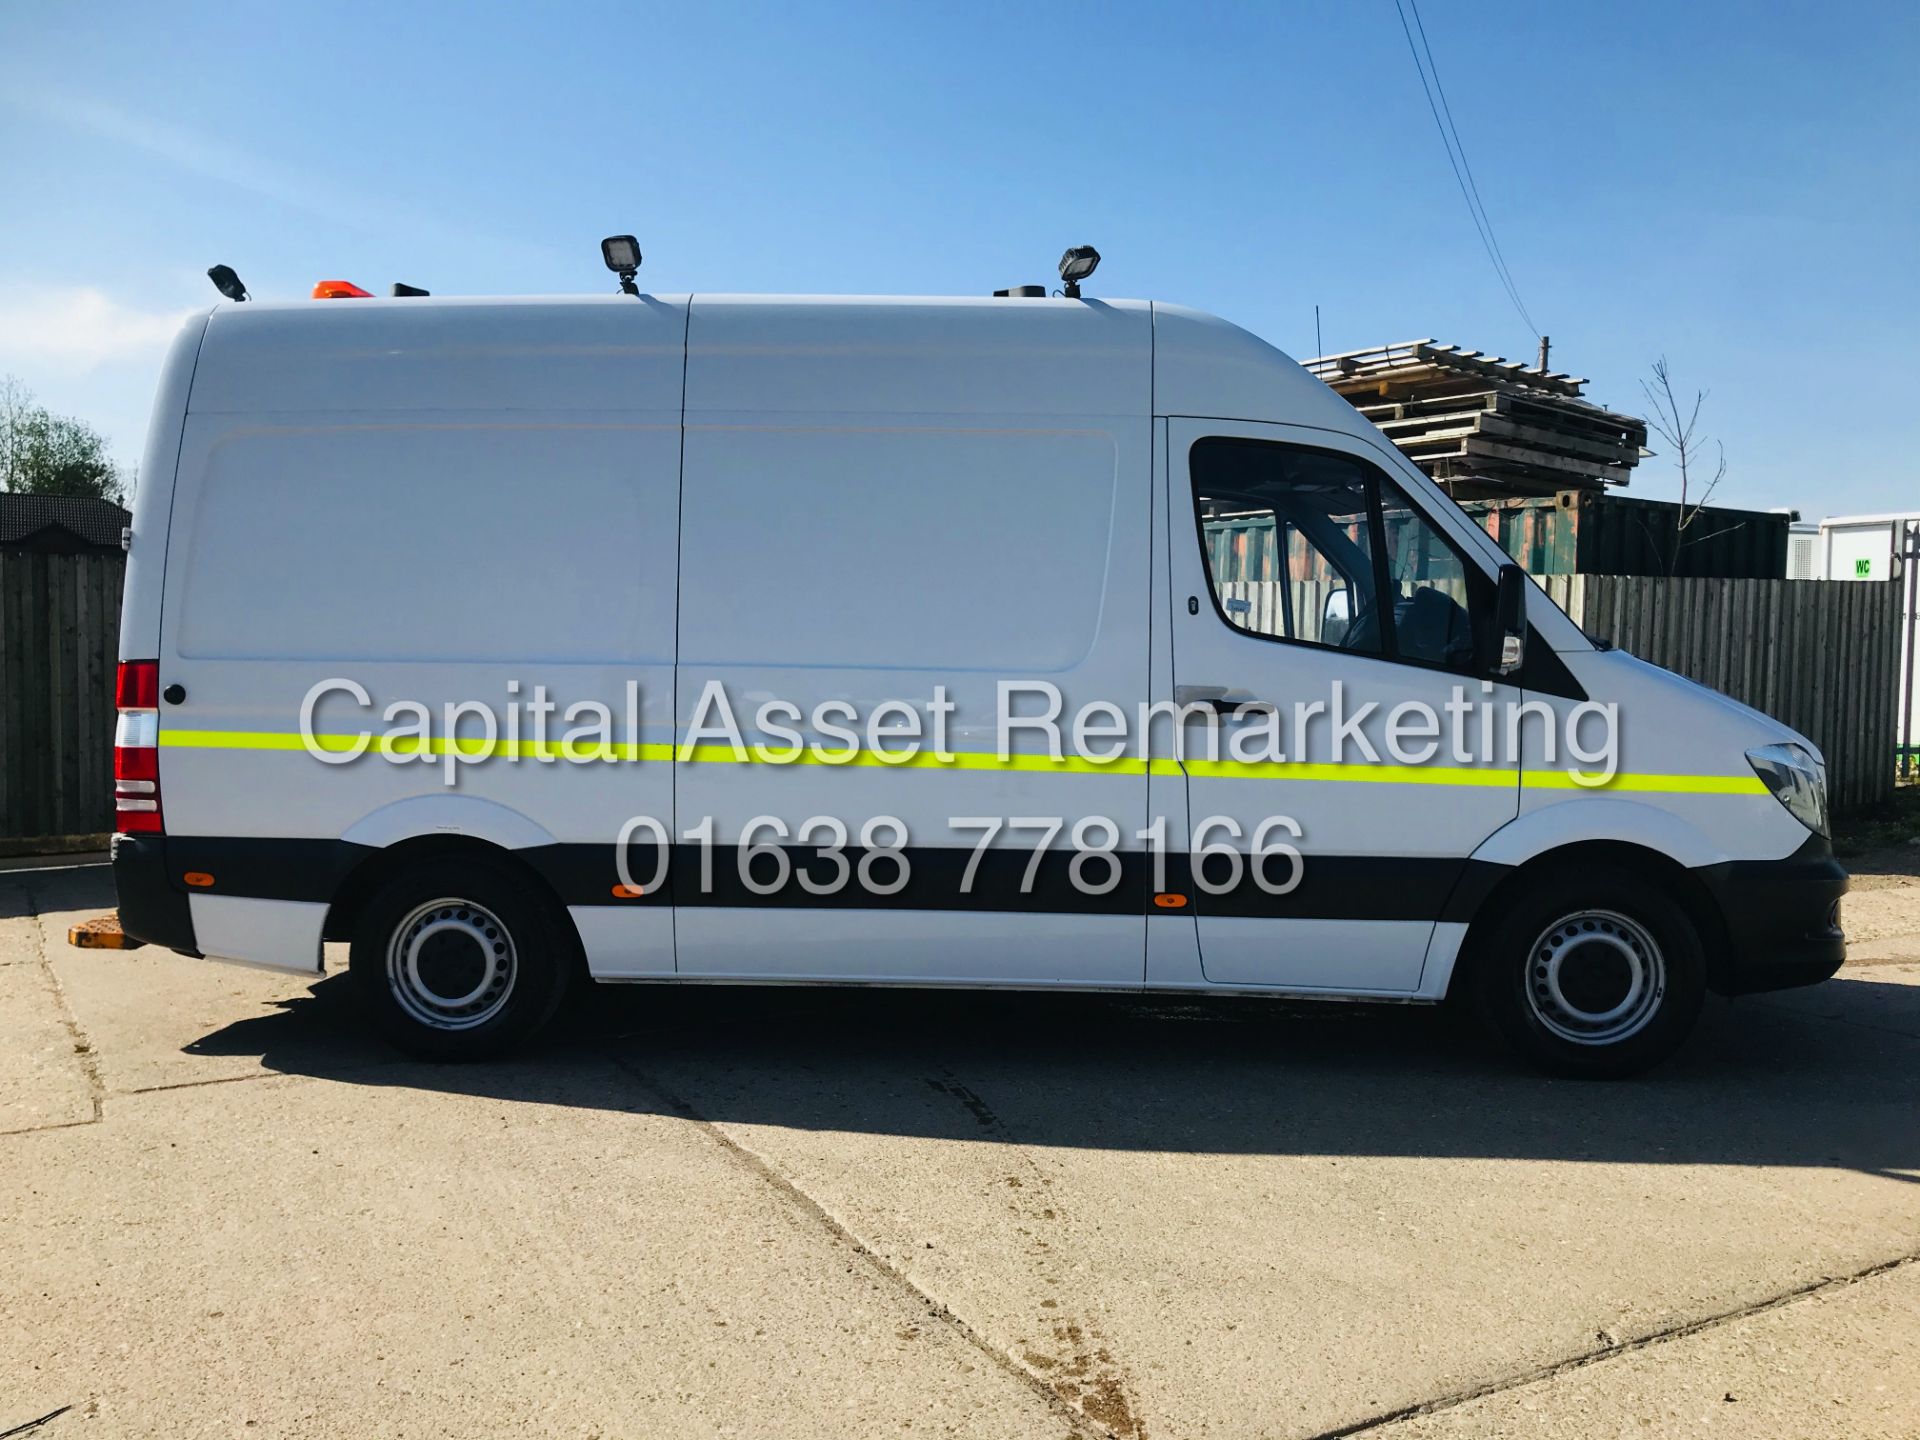 (ON SALE) MERCEDES SPRINTER 313CDI "FULLY FITTED CCTV DRAINAGE VAN" 1 OWNER FSH (15 REG) - Image 13 of 38